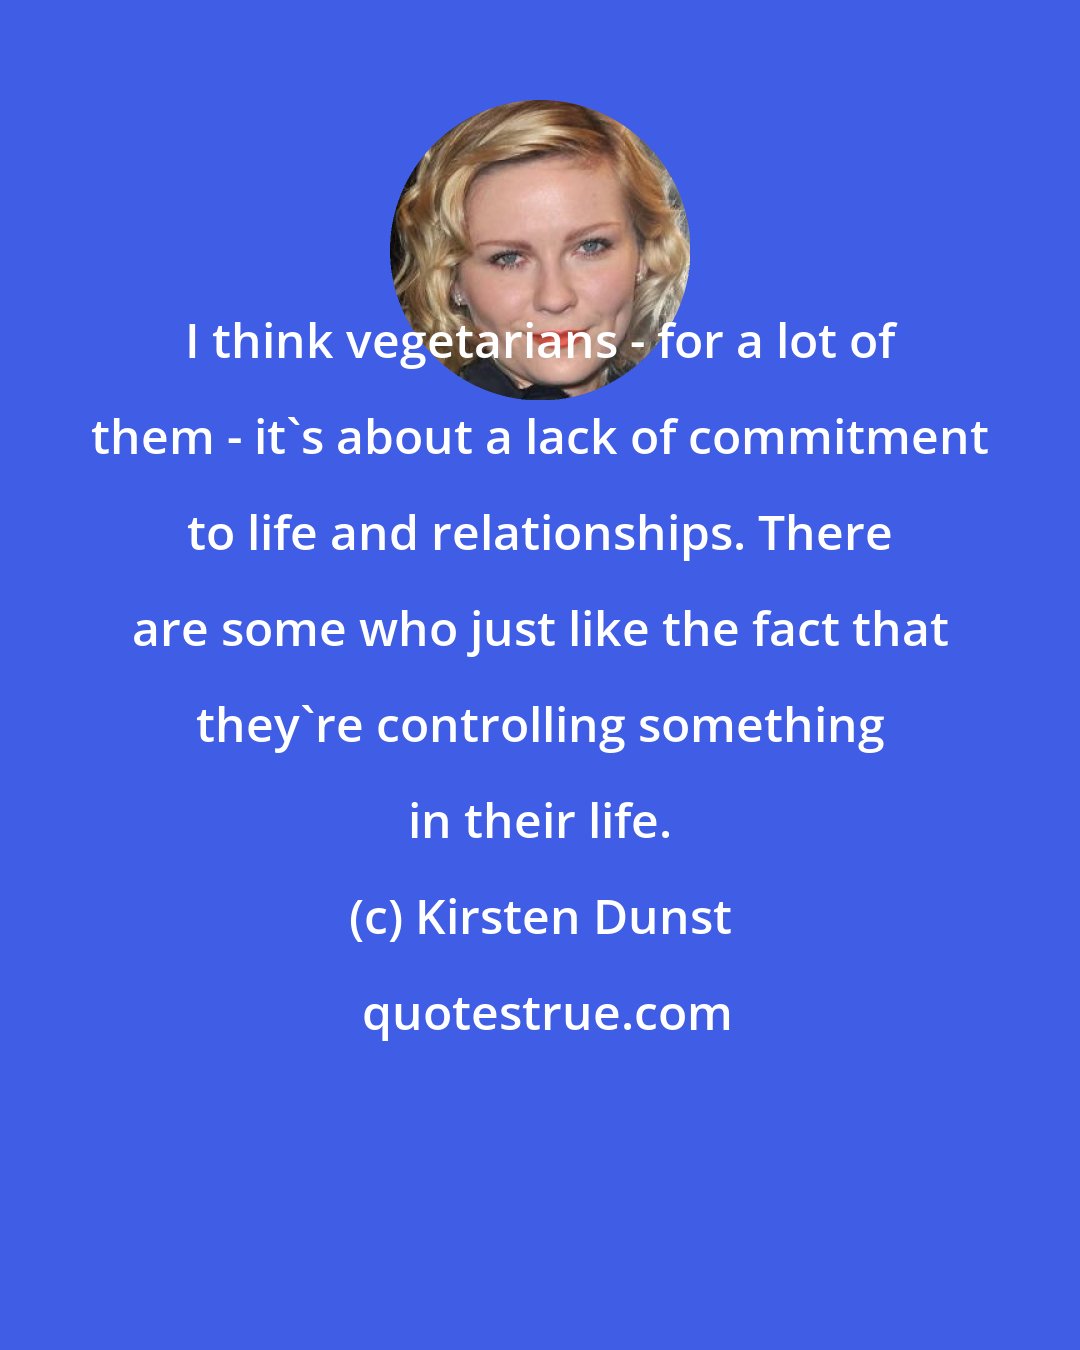 Kirsten Dunst: I think vegetarians - for a lot of them - it's about a lack of commitment to life and relationships. There are some who just like the fact that they're controlling something in their life.